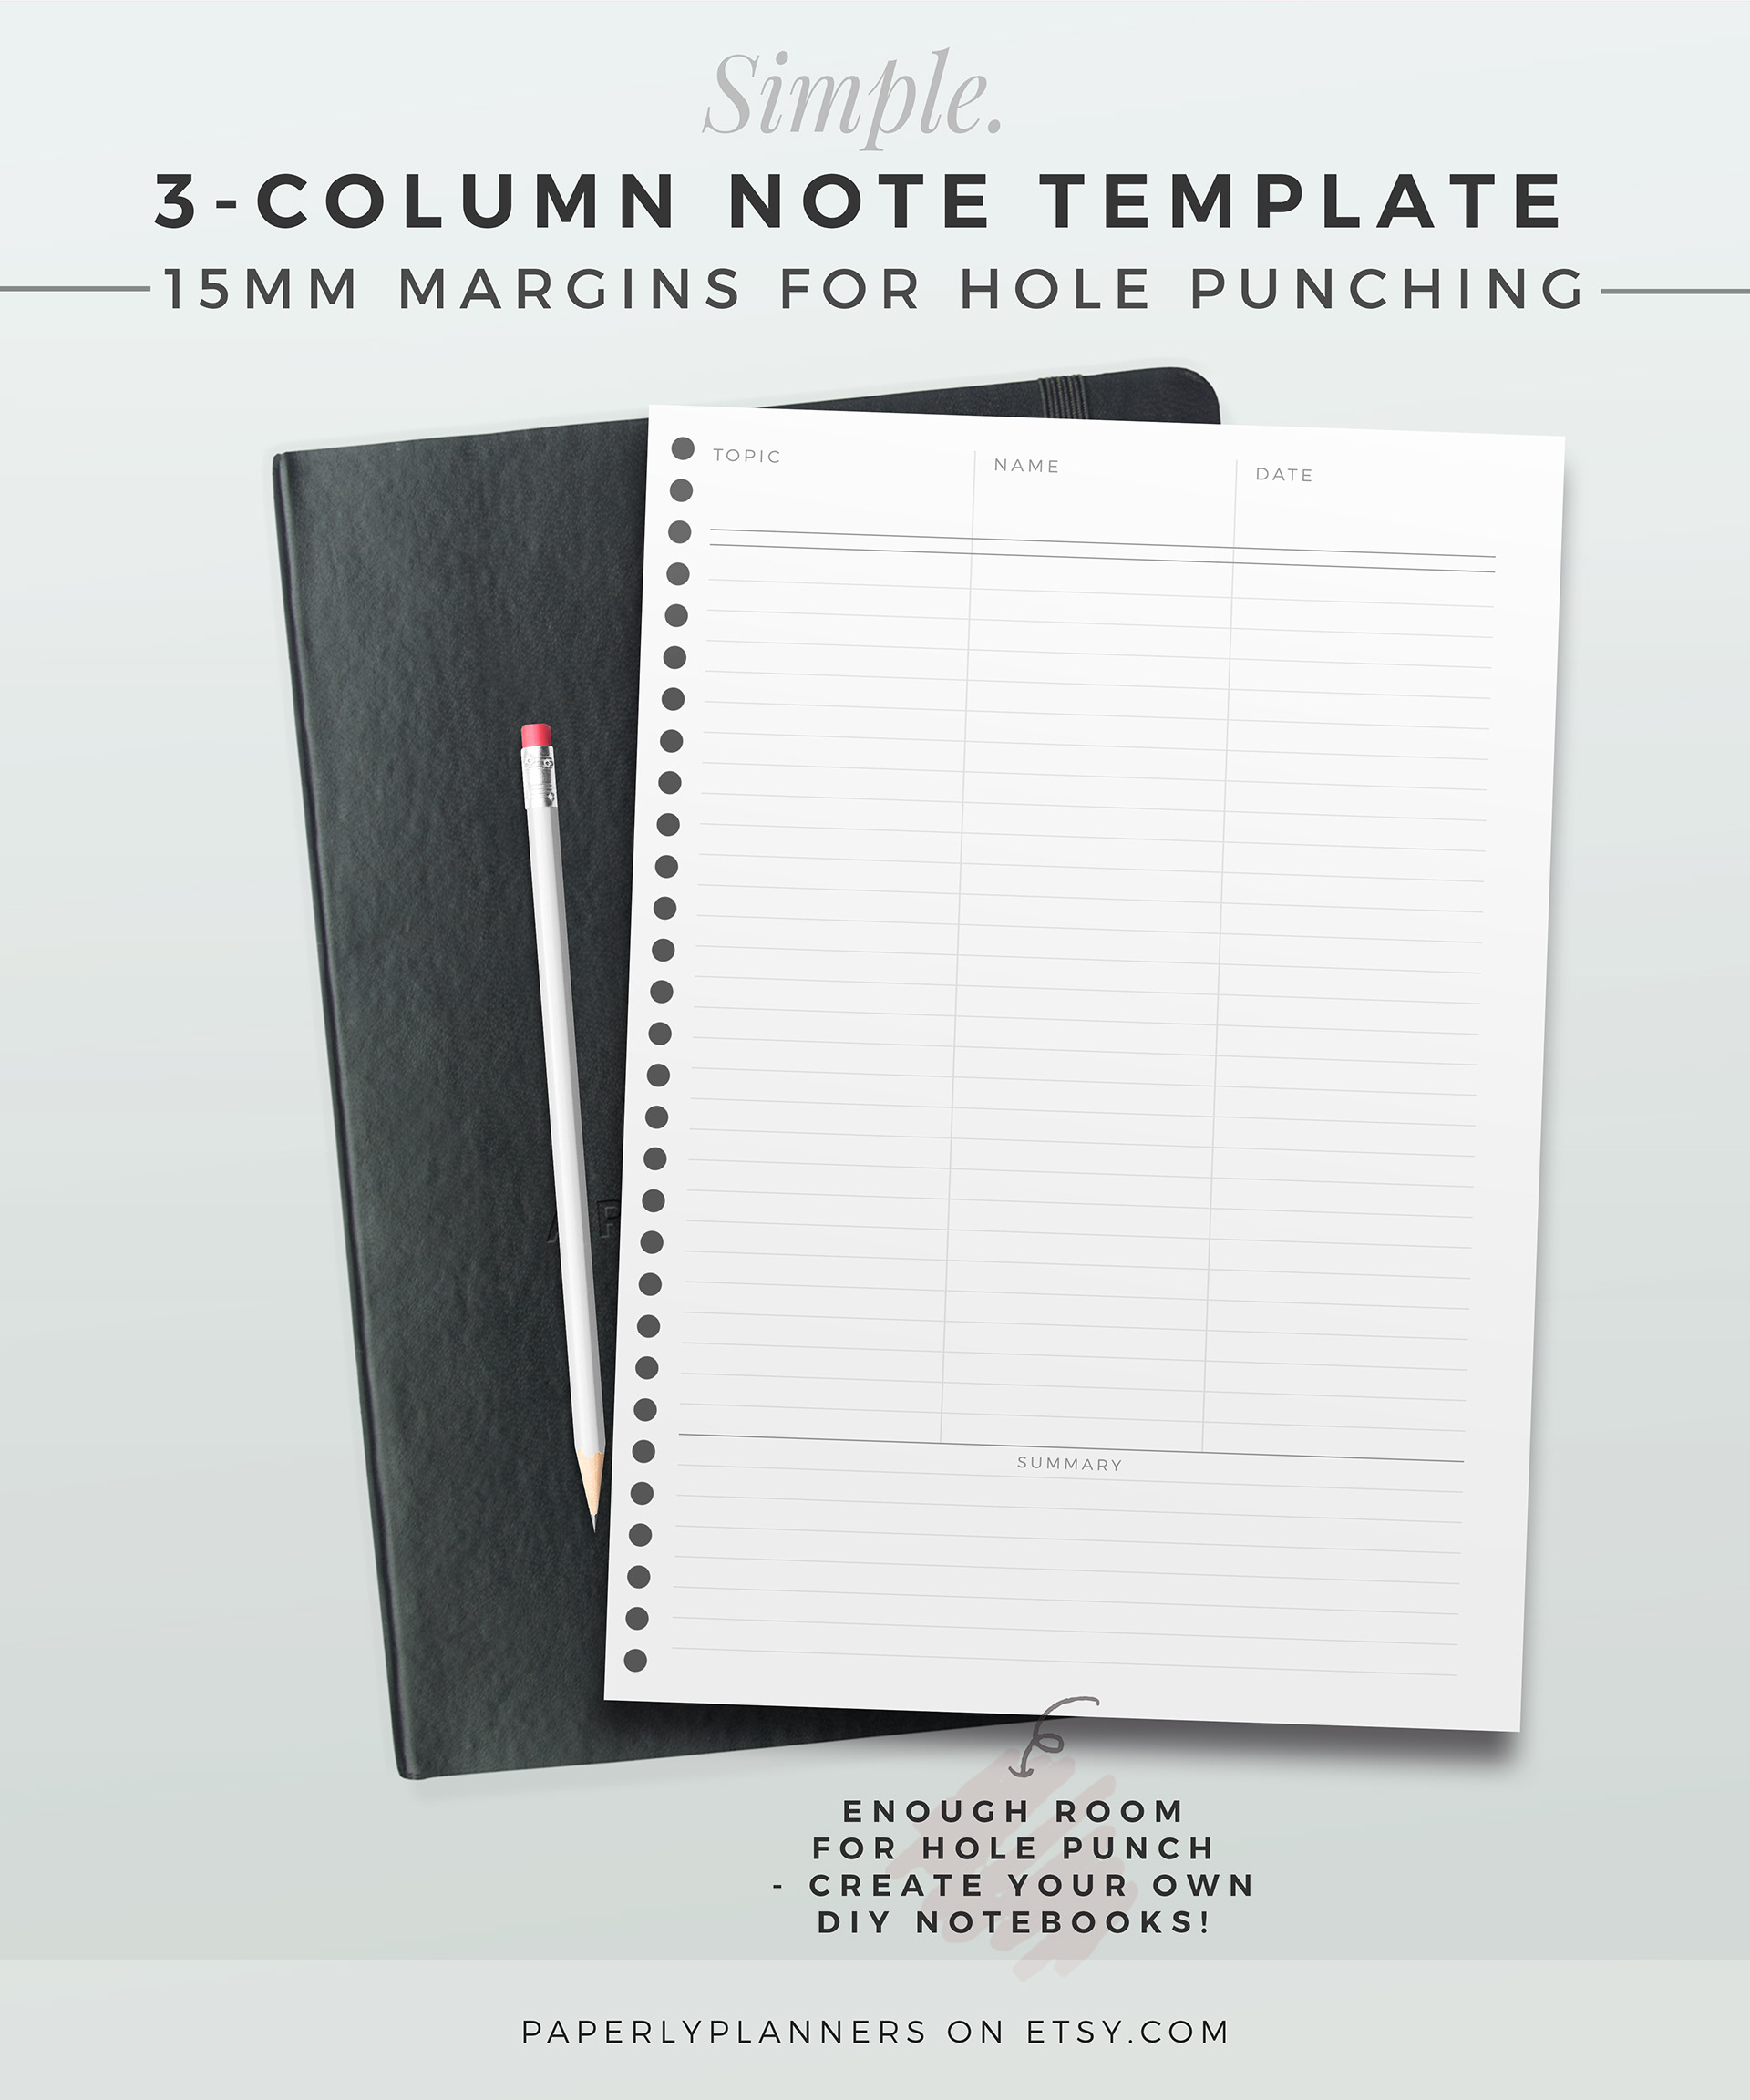 paperly-planners-beautiful-productive-simple-3-column-note-template